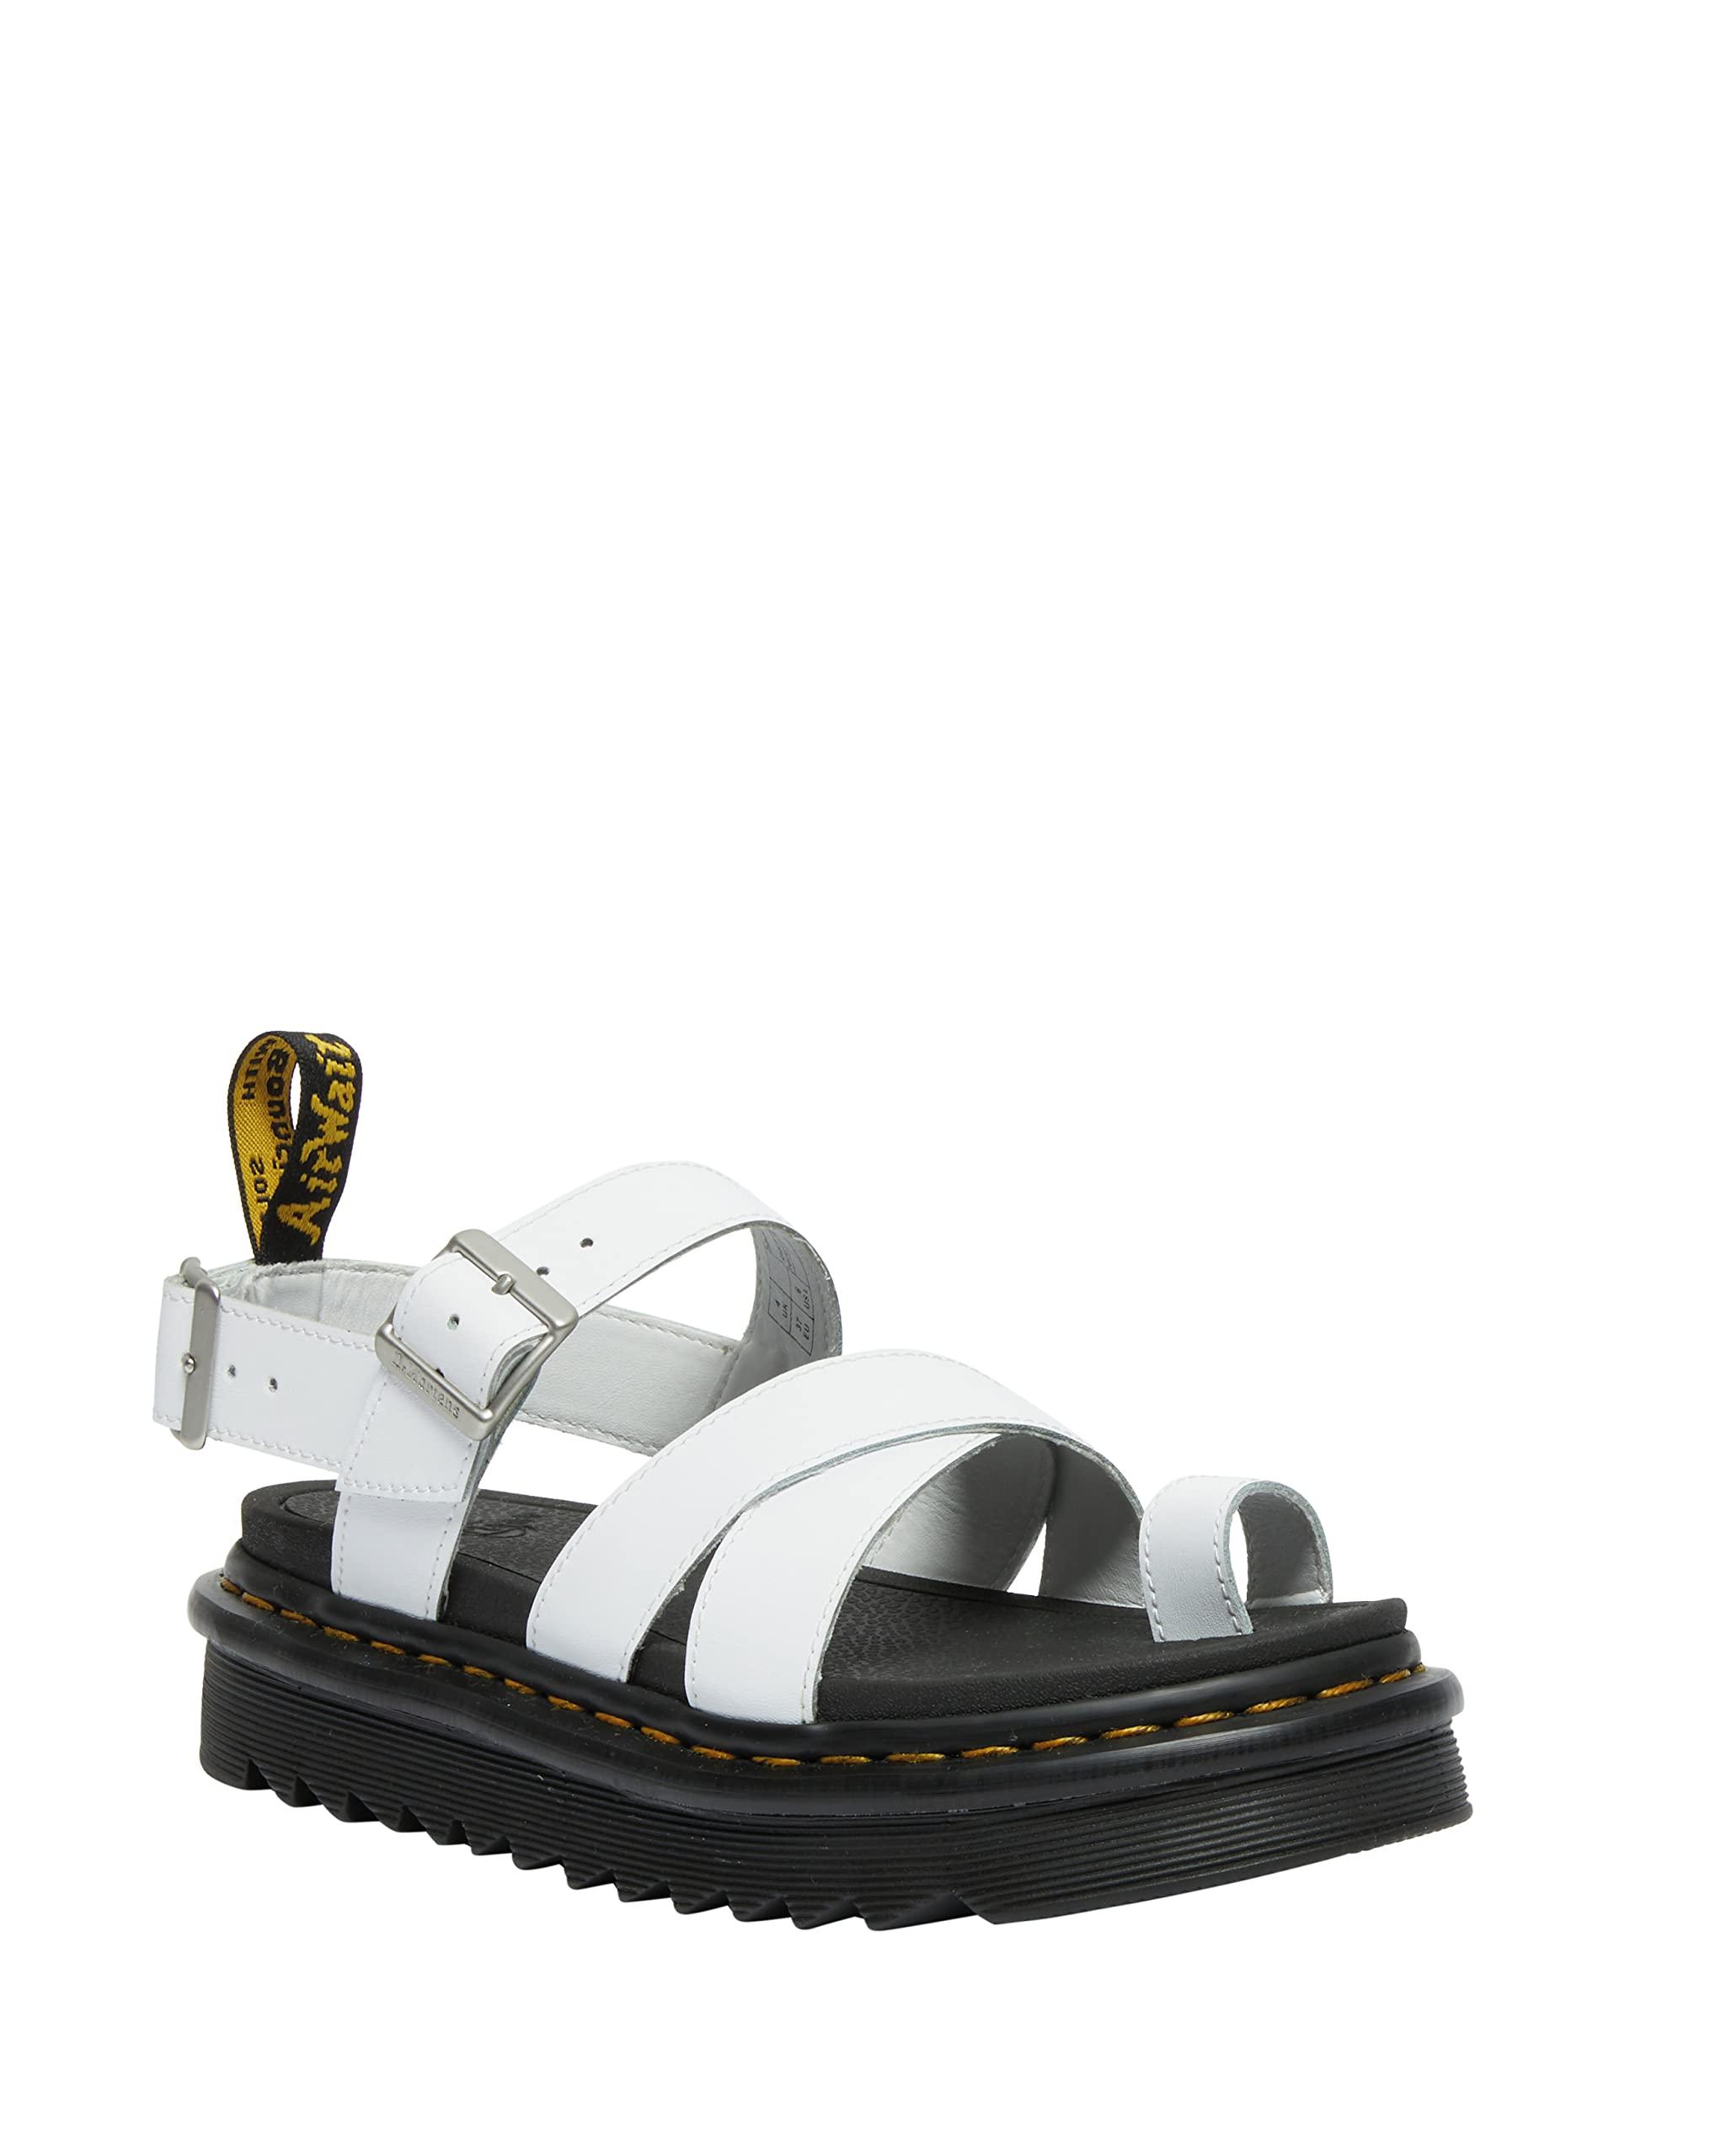 Dr. Martens Avry Sandals in Black | Lyst